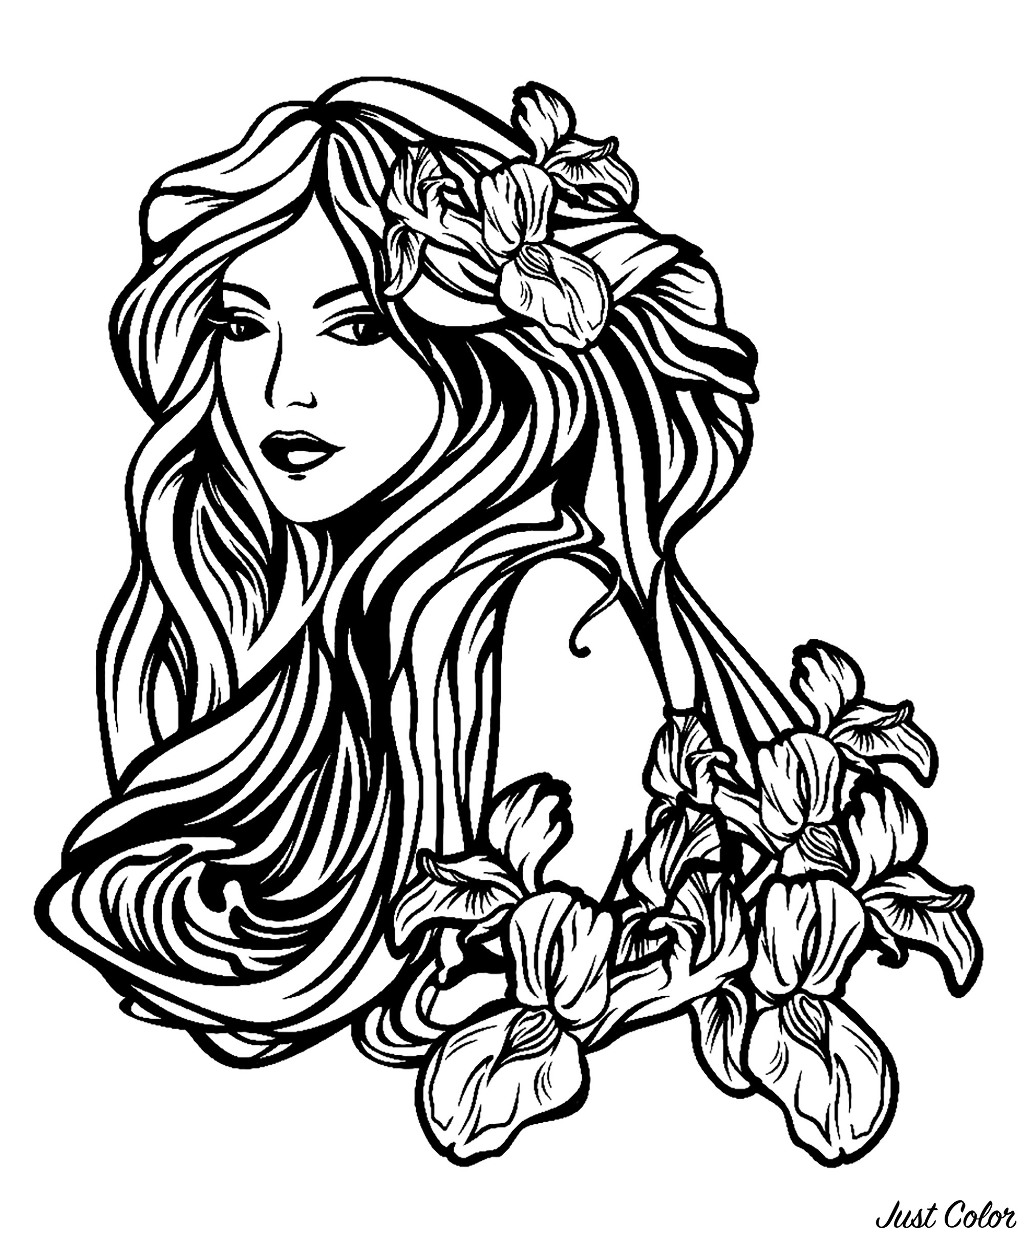 Woman with long hair among flowers - Tattoos Adult Coloring Pages